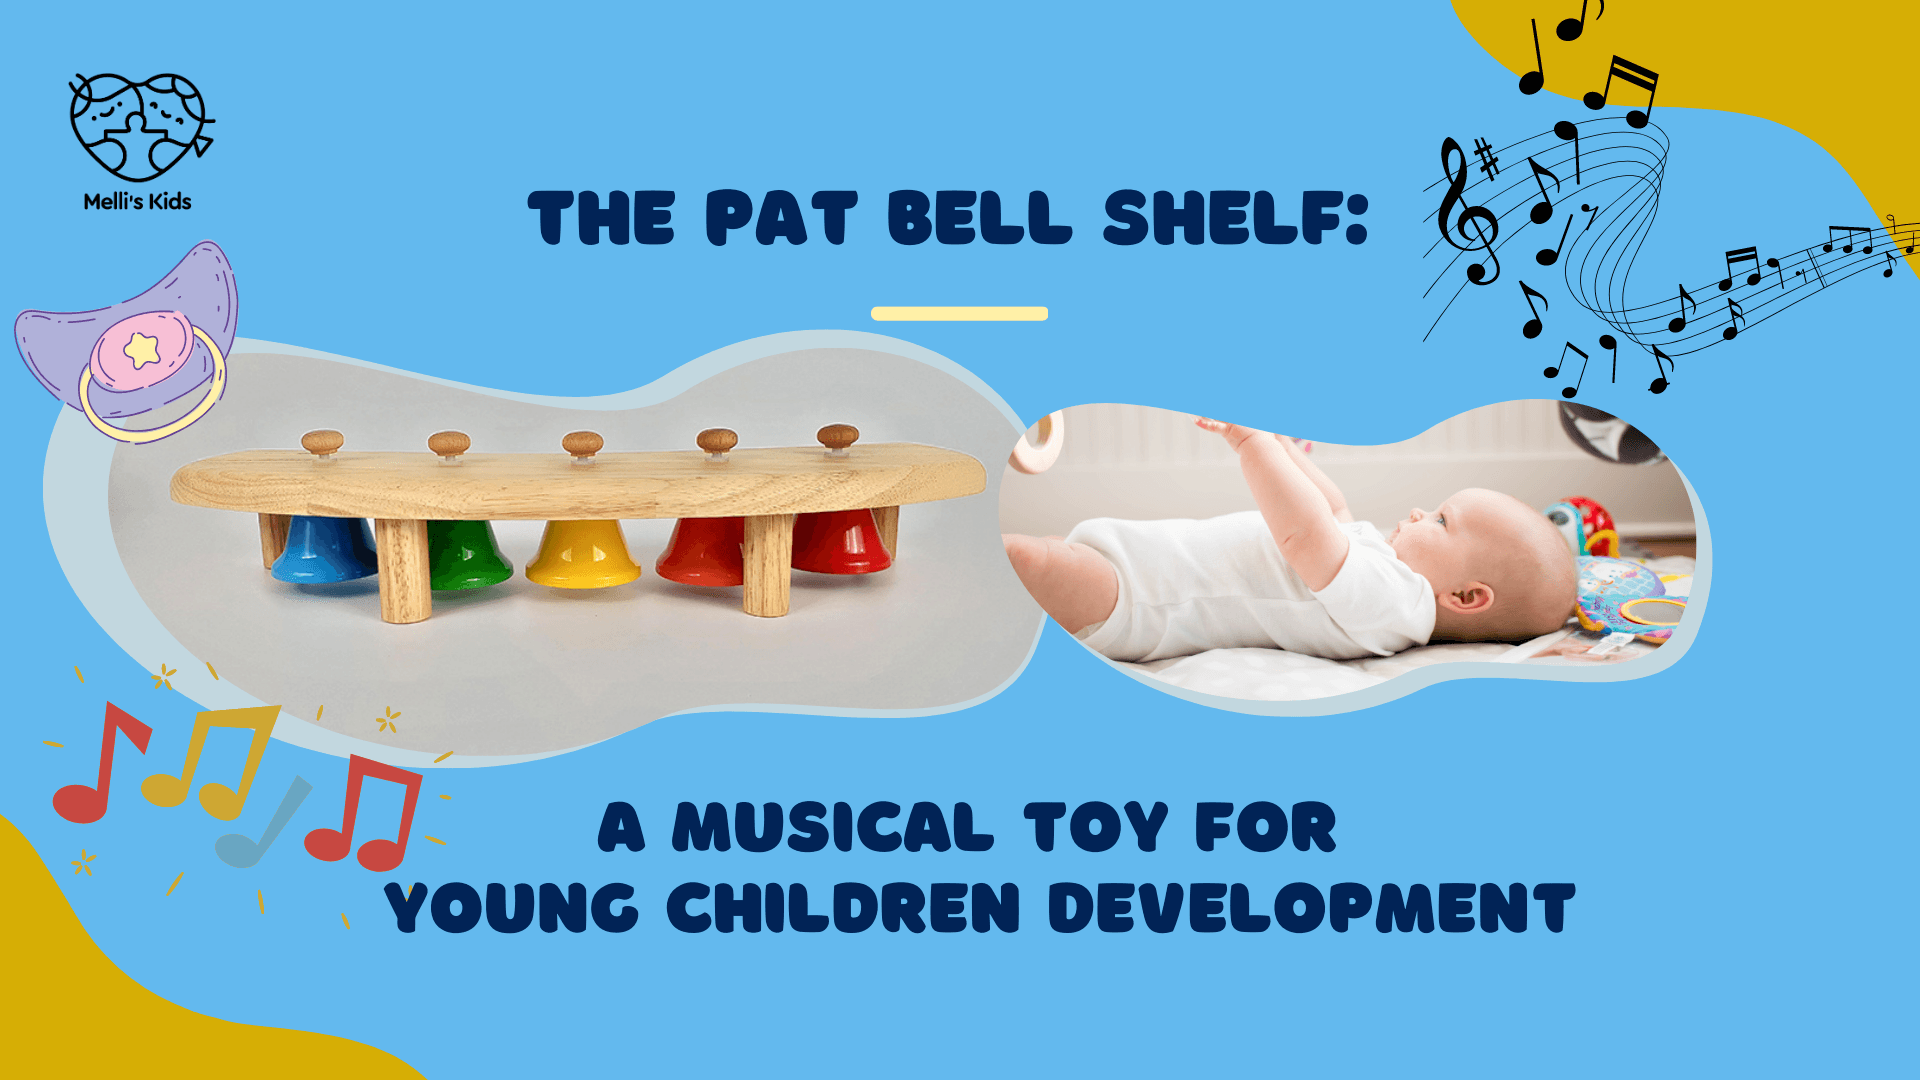 The Pat Bell Shelf: A Musical Toy for Young Children's Development - Melli's Kids